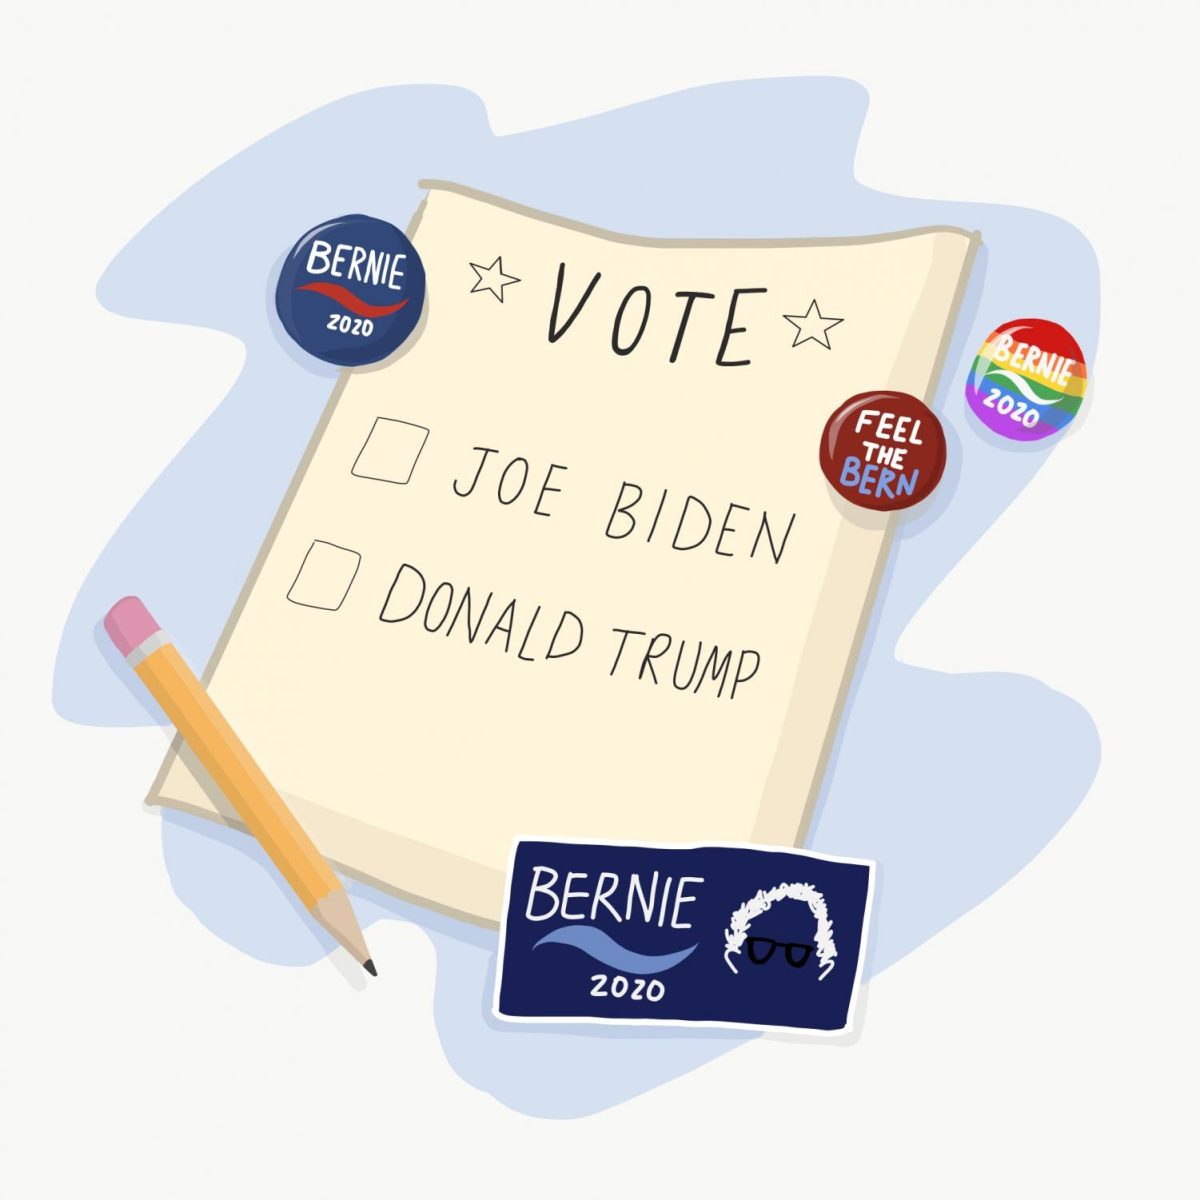 An+illustration+of+a+voting+ballot+with+the+options+%26%238220%3BJoe+Biden%26%238221%3B+and+%26%238220%3BDonald+Trump%26%238221%3B.+The+ballot+is+surrounded+by+Bernie+Sanders+campaign+buttons+and+stickers+and+a+pencil.